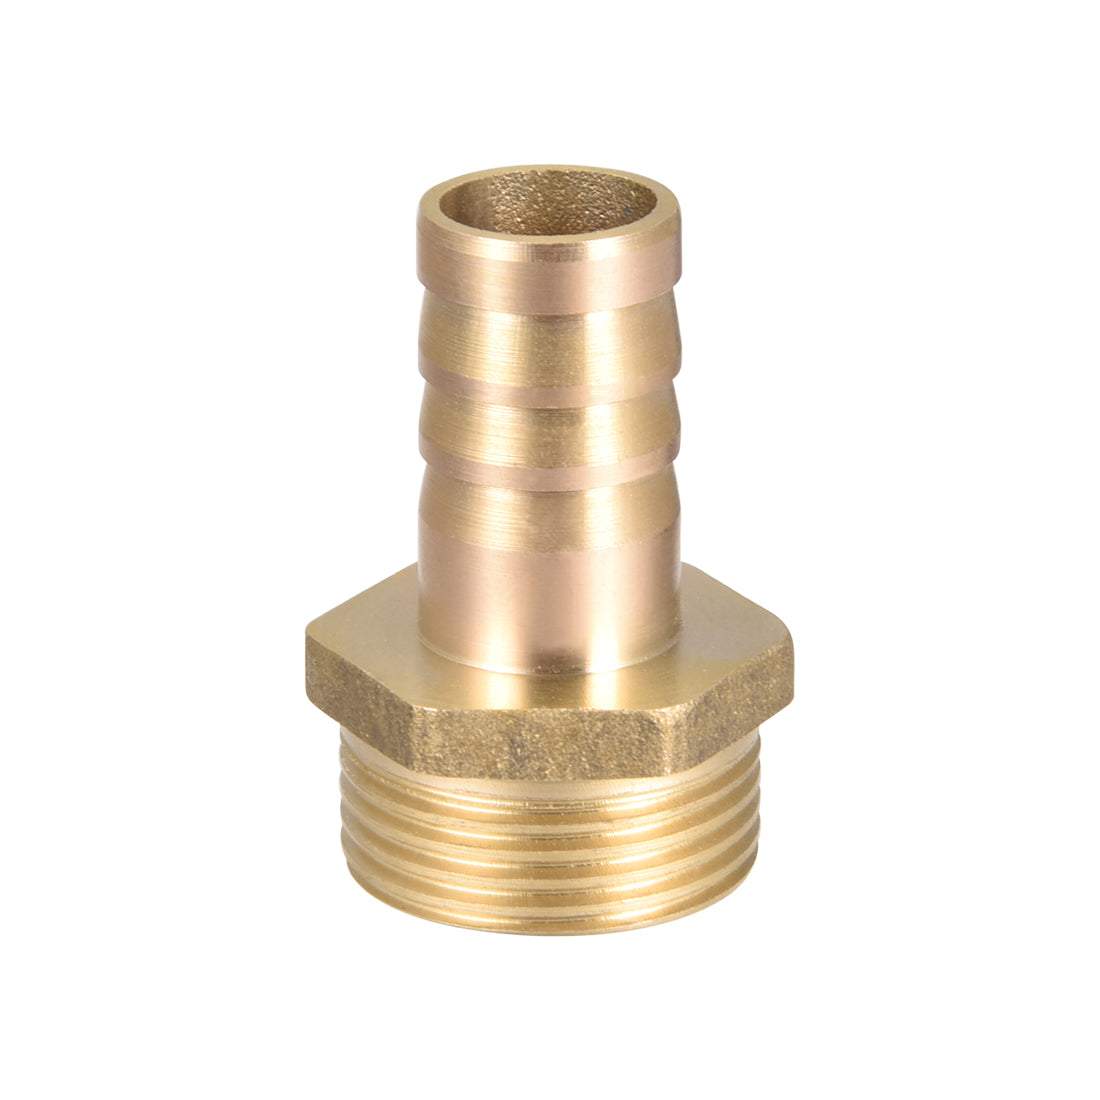 uxcell Uxcell Brass Barb Hose Fitting Connector Adapter 16mm Barbed x G3/4 Male